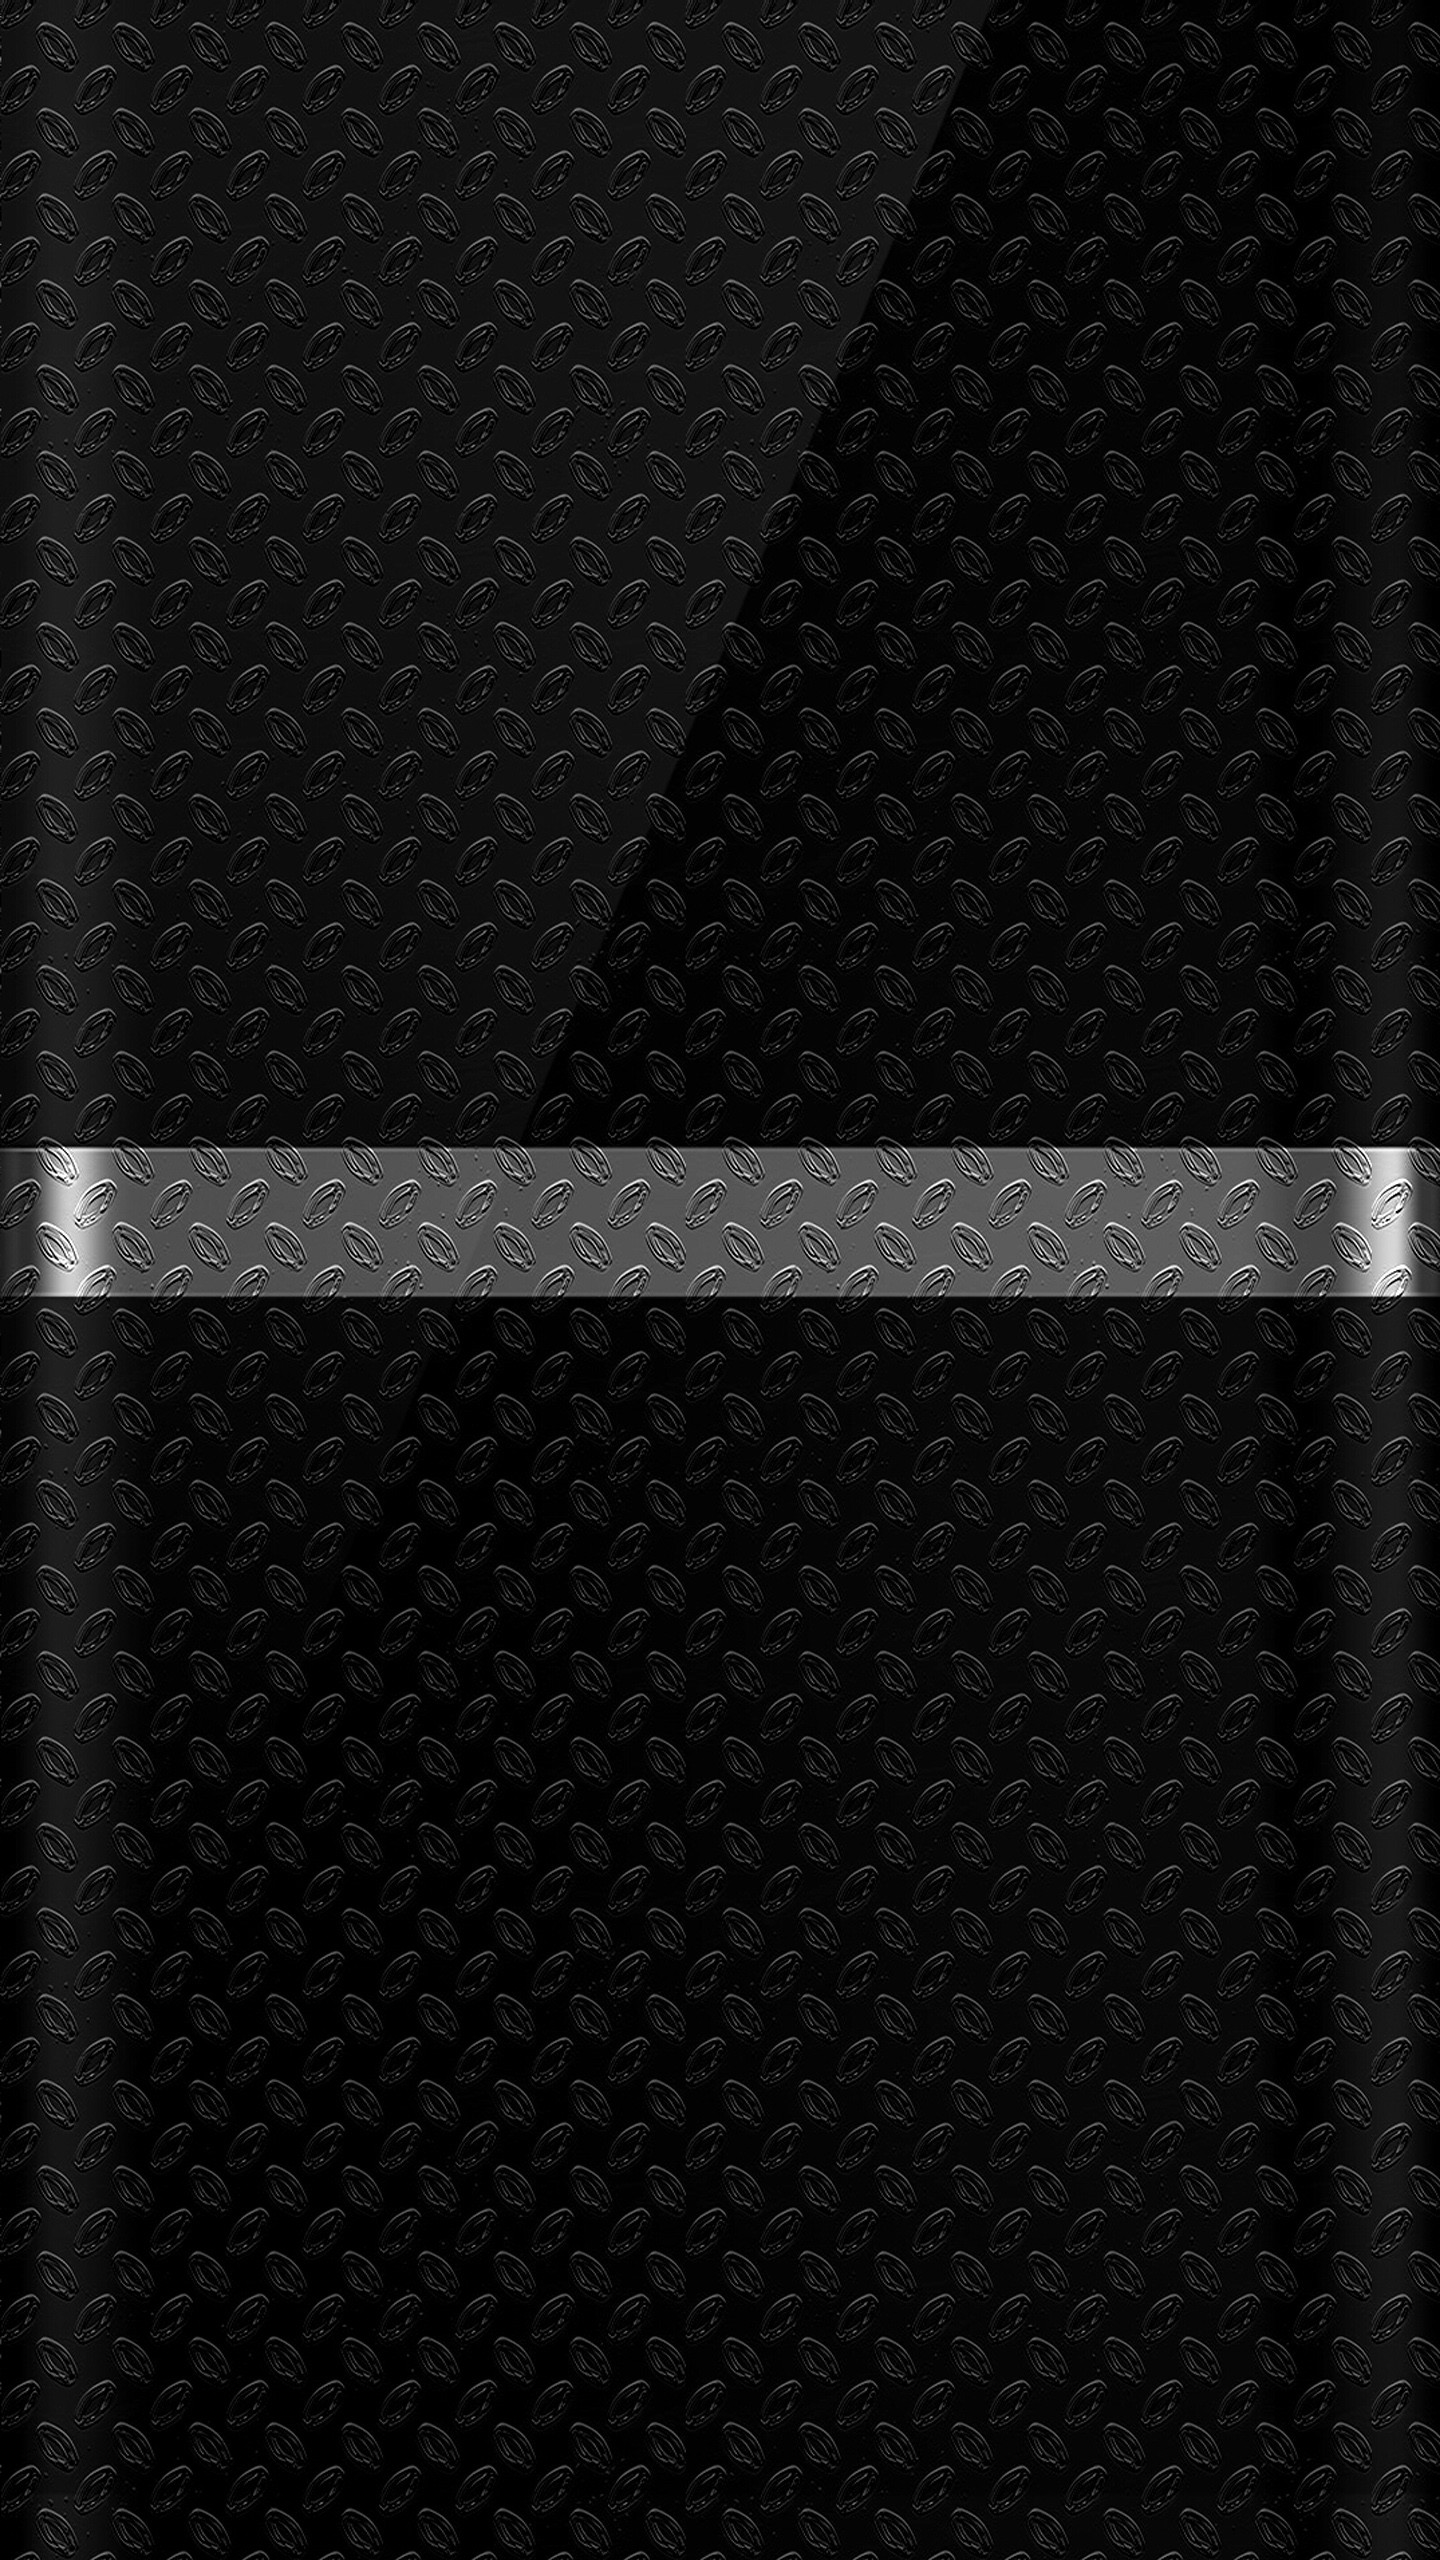 Dark S7 Edge Wallpaper 07 with Black Background and Silver Line